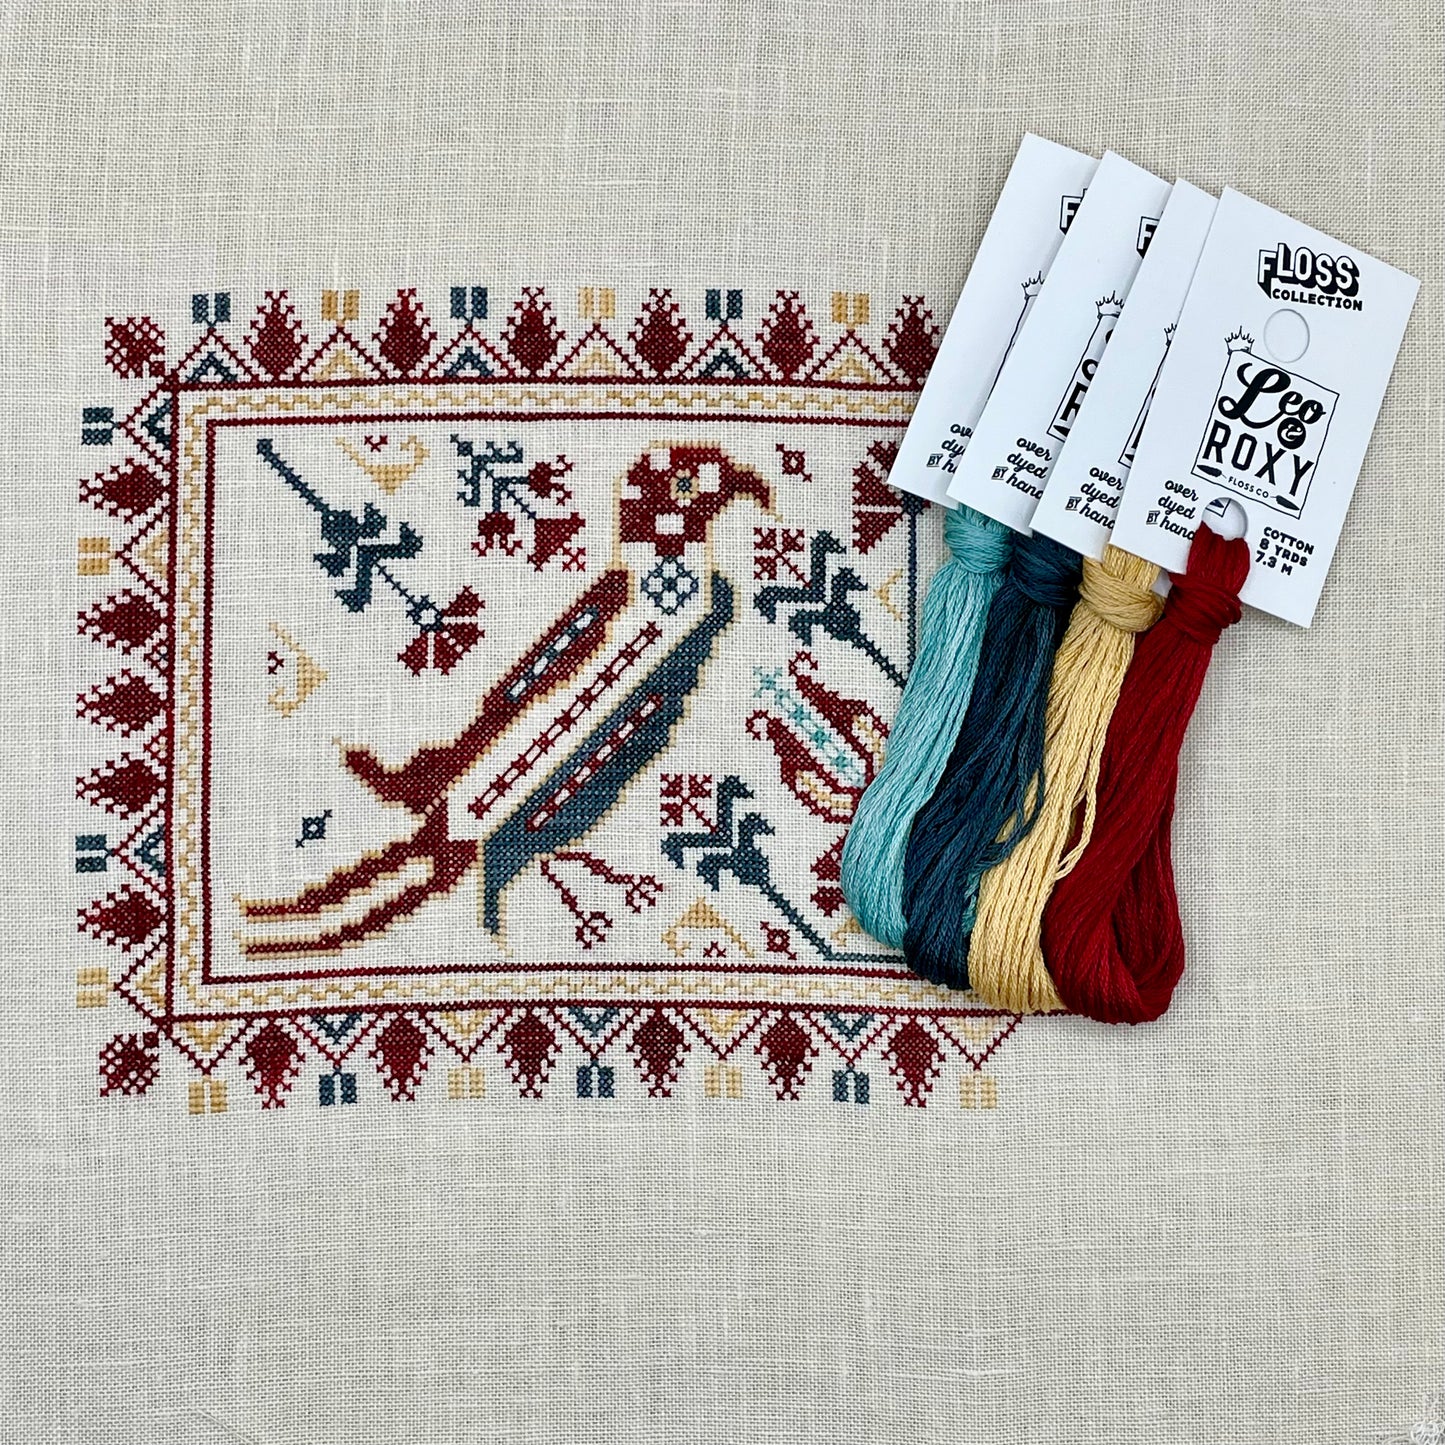 Avlea Embroidery - Macedonian Birds Basic Kit - Booklet Chart and/or Roxy Floss